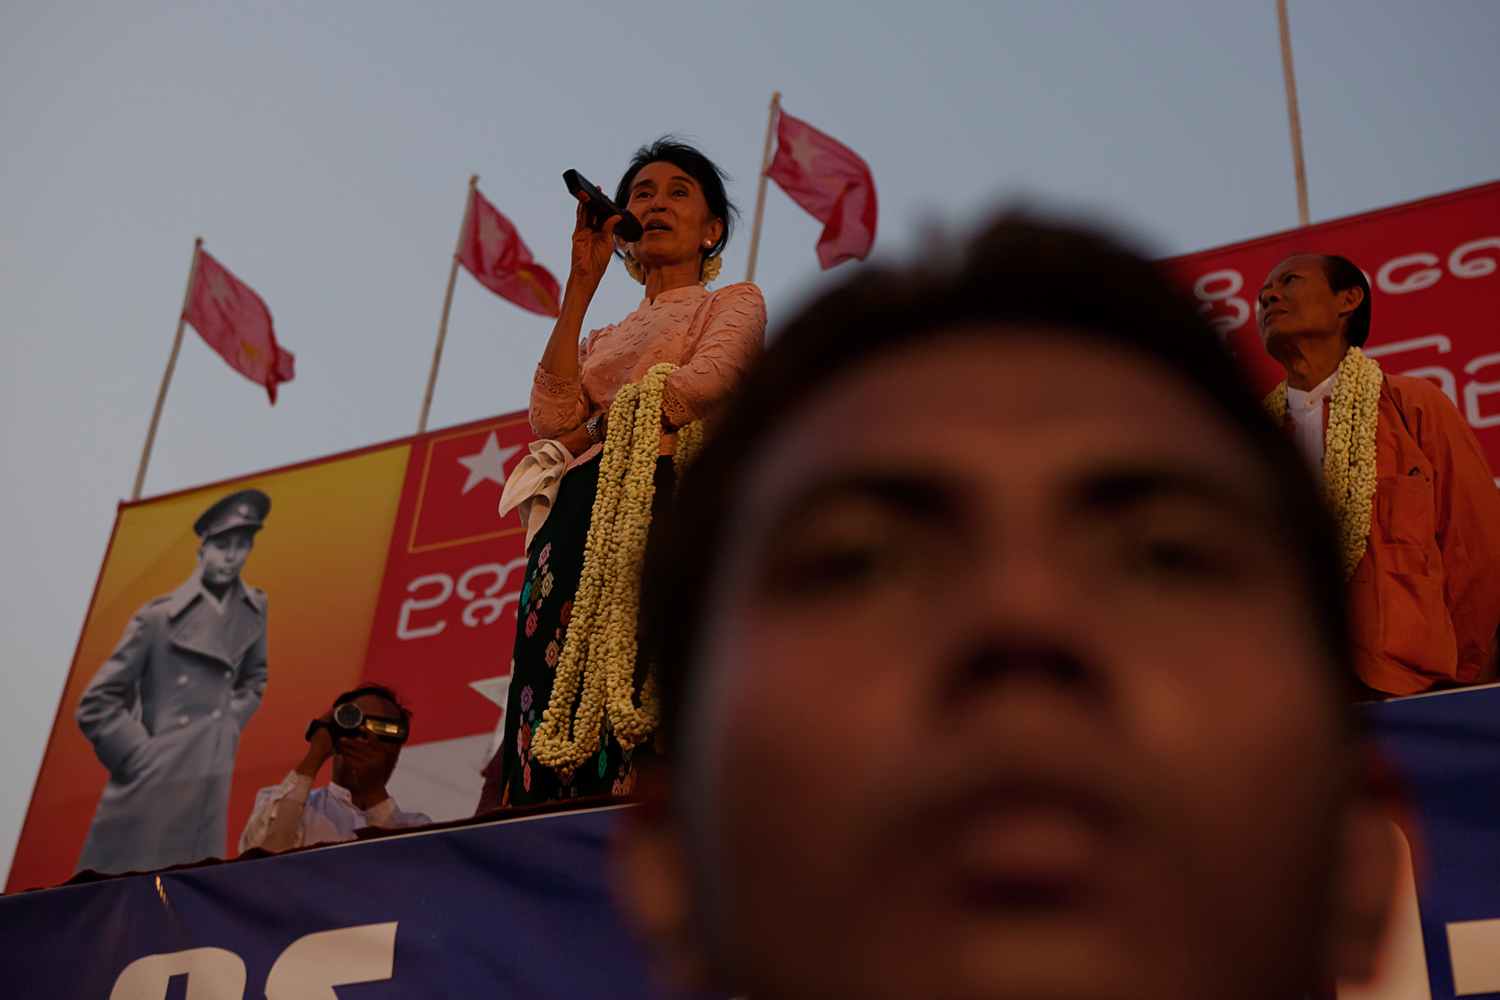 March 21, 2012. During the election campaign Aung San Suu Kyi addresses a crowd of supporters at Yuzana Garden City in Dagon South Township.